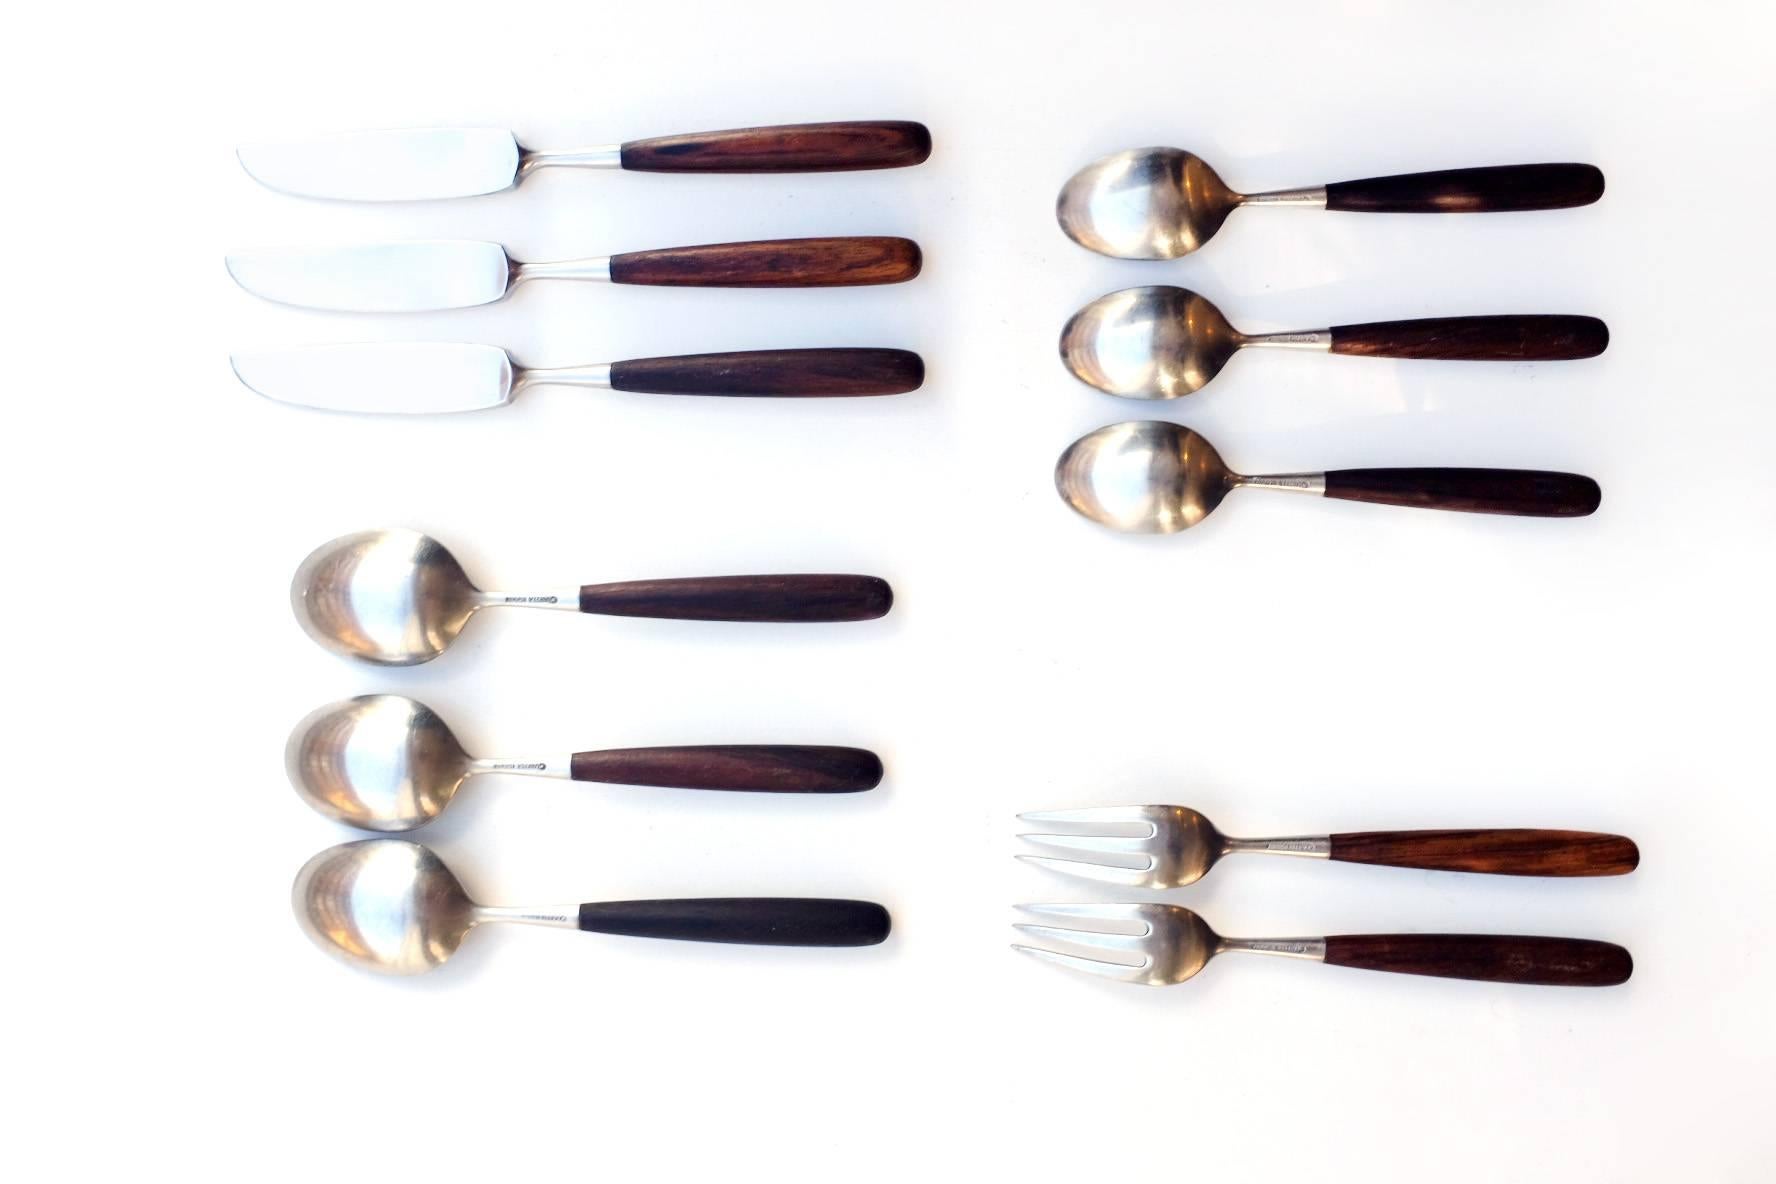 This Classic Mid-Century Modern design flatware is created by the famous designer Don Wallance in 1969. Made in Norway from high-quality stainless steel and rosewood. Each one is hand-finished and shows very minor variations. These pieces will look